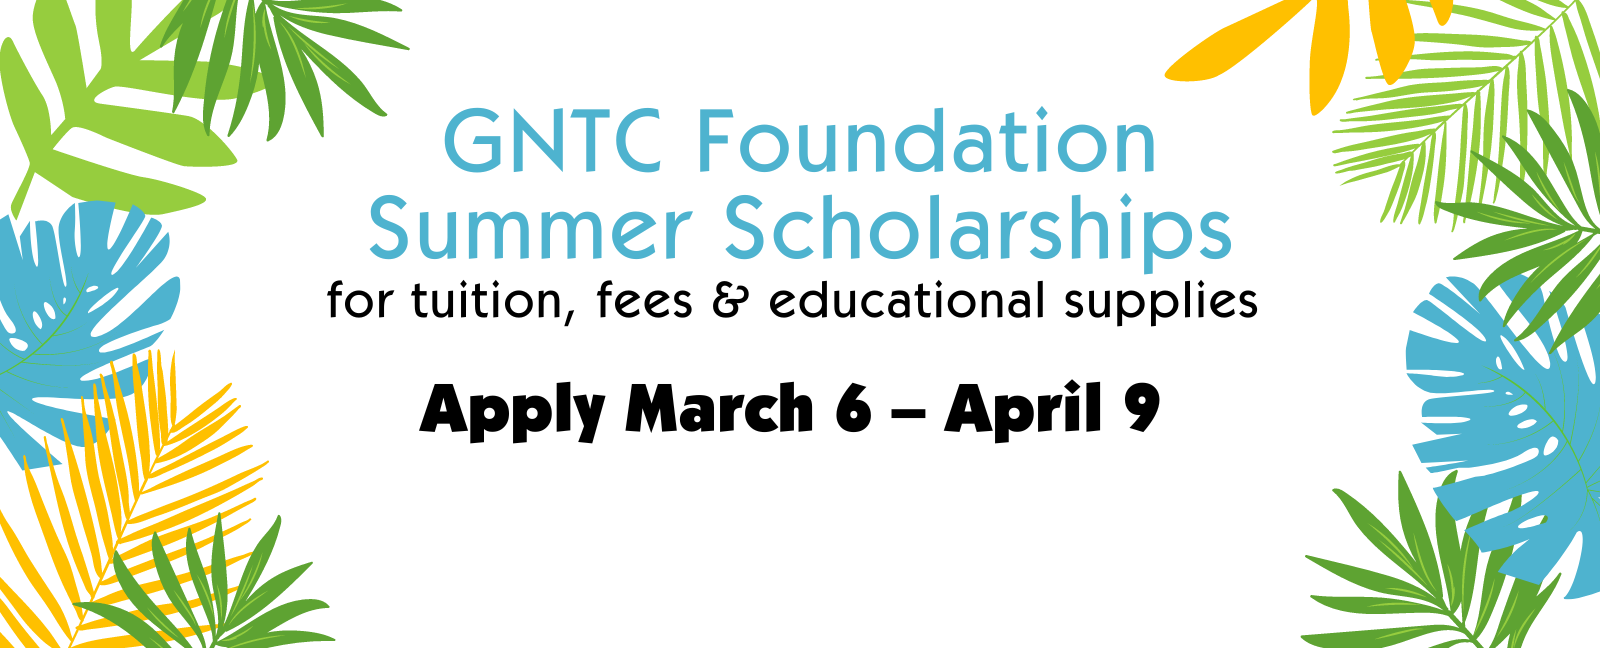 GNTC Foundation Summer Scholarships
for tuition, fees & educational supplies 
Apply March 6 – April 9